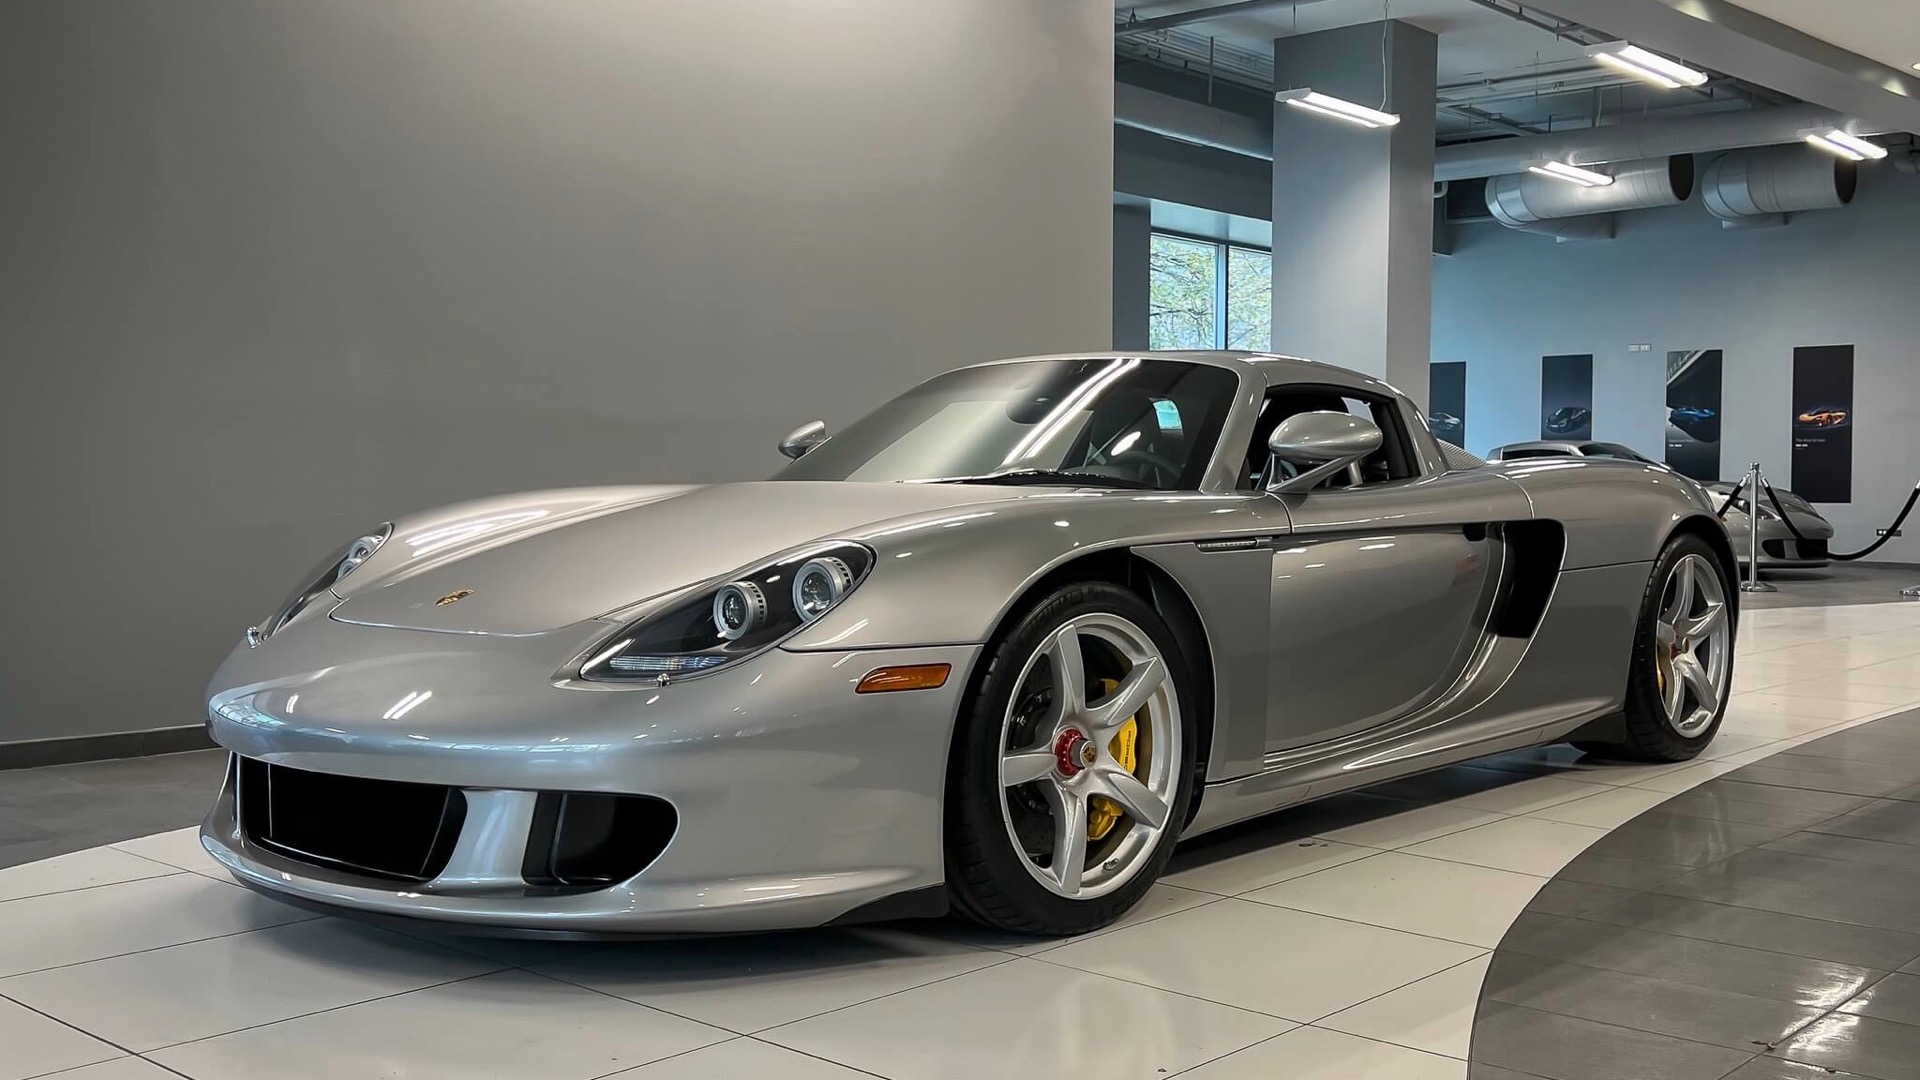 2005 Porsche Carrera GT for sale with 342 miles